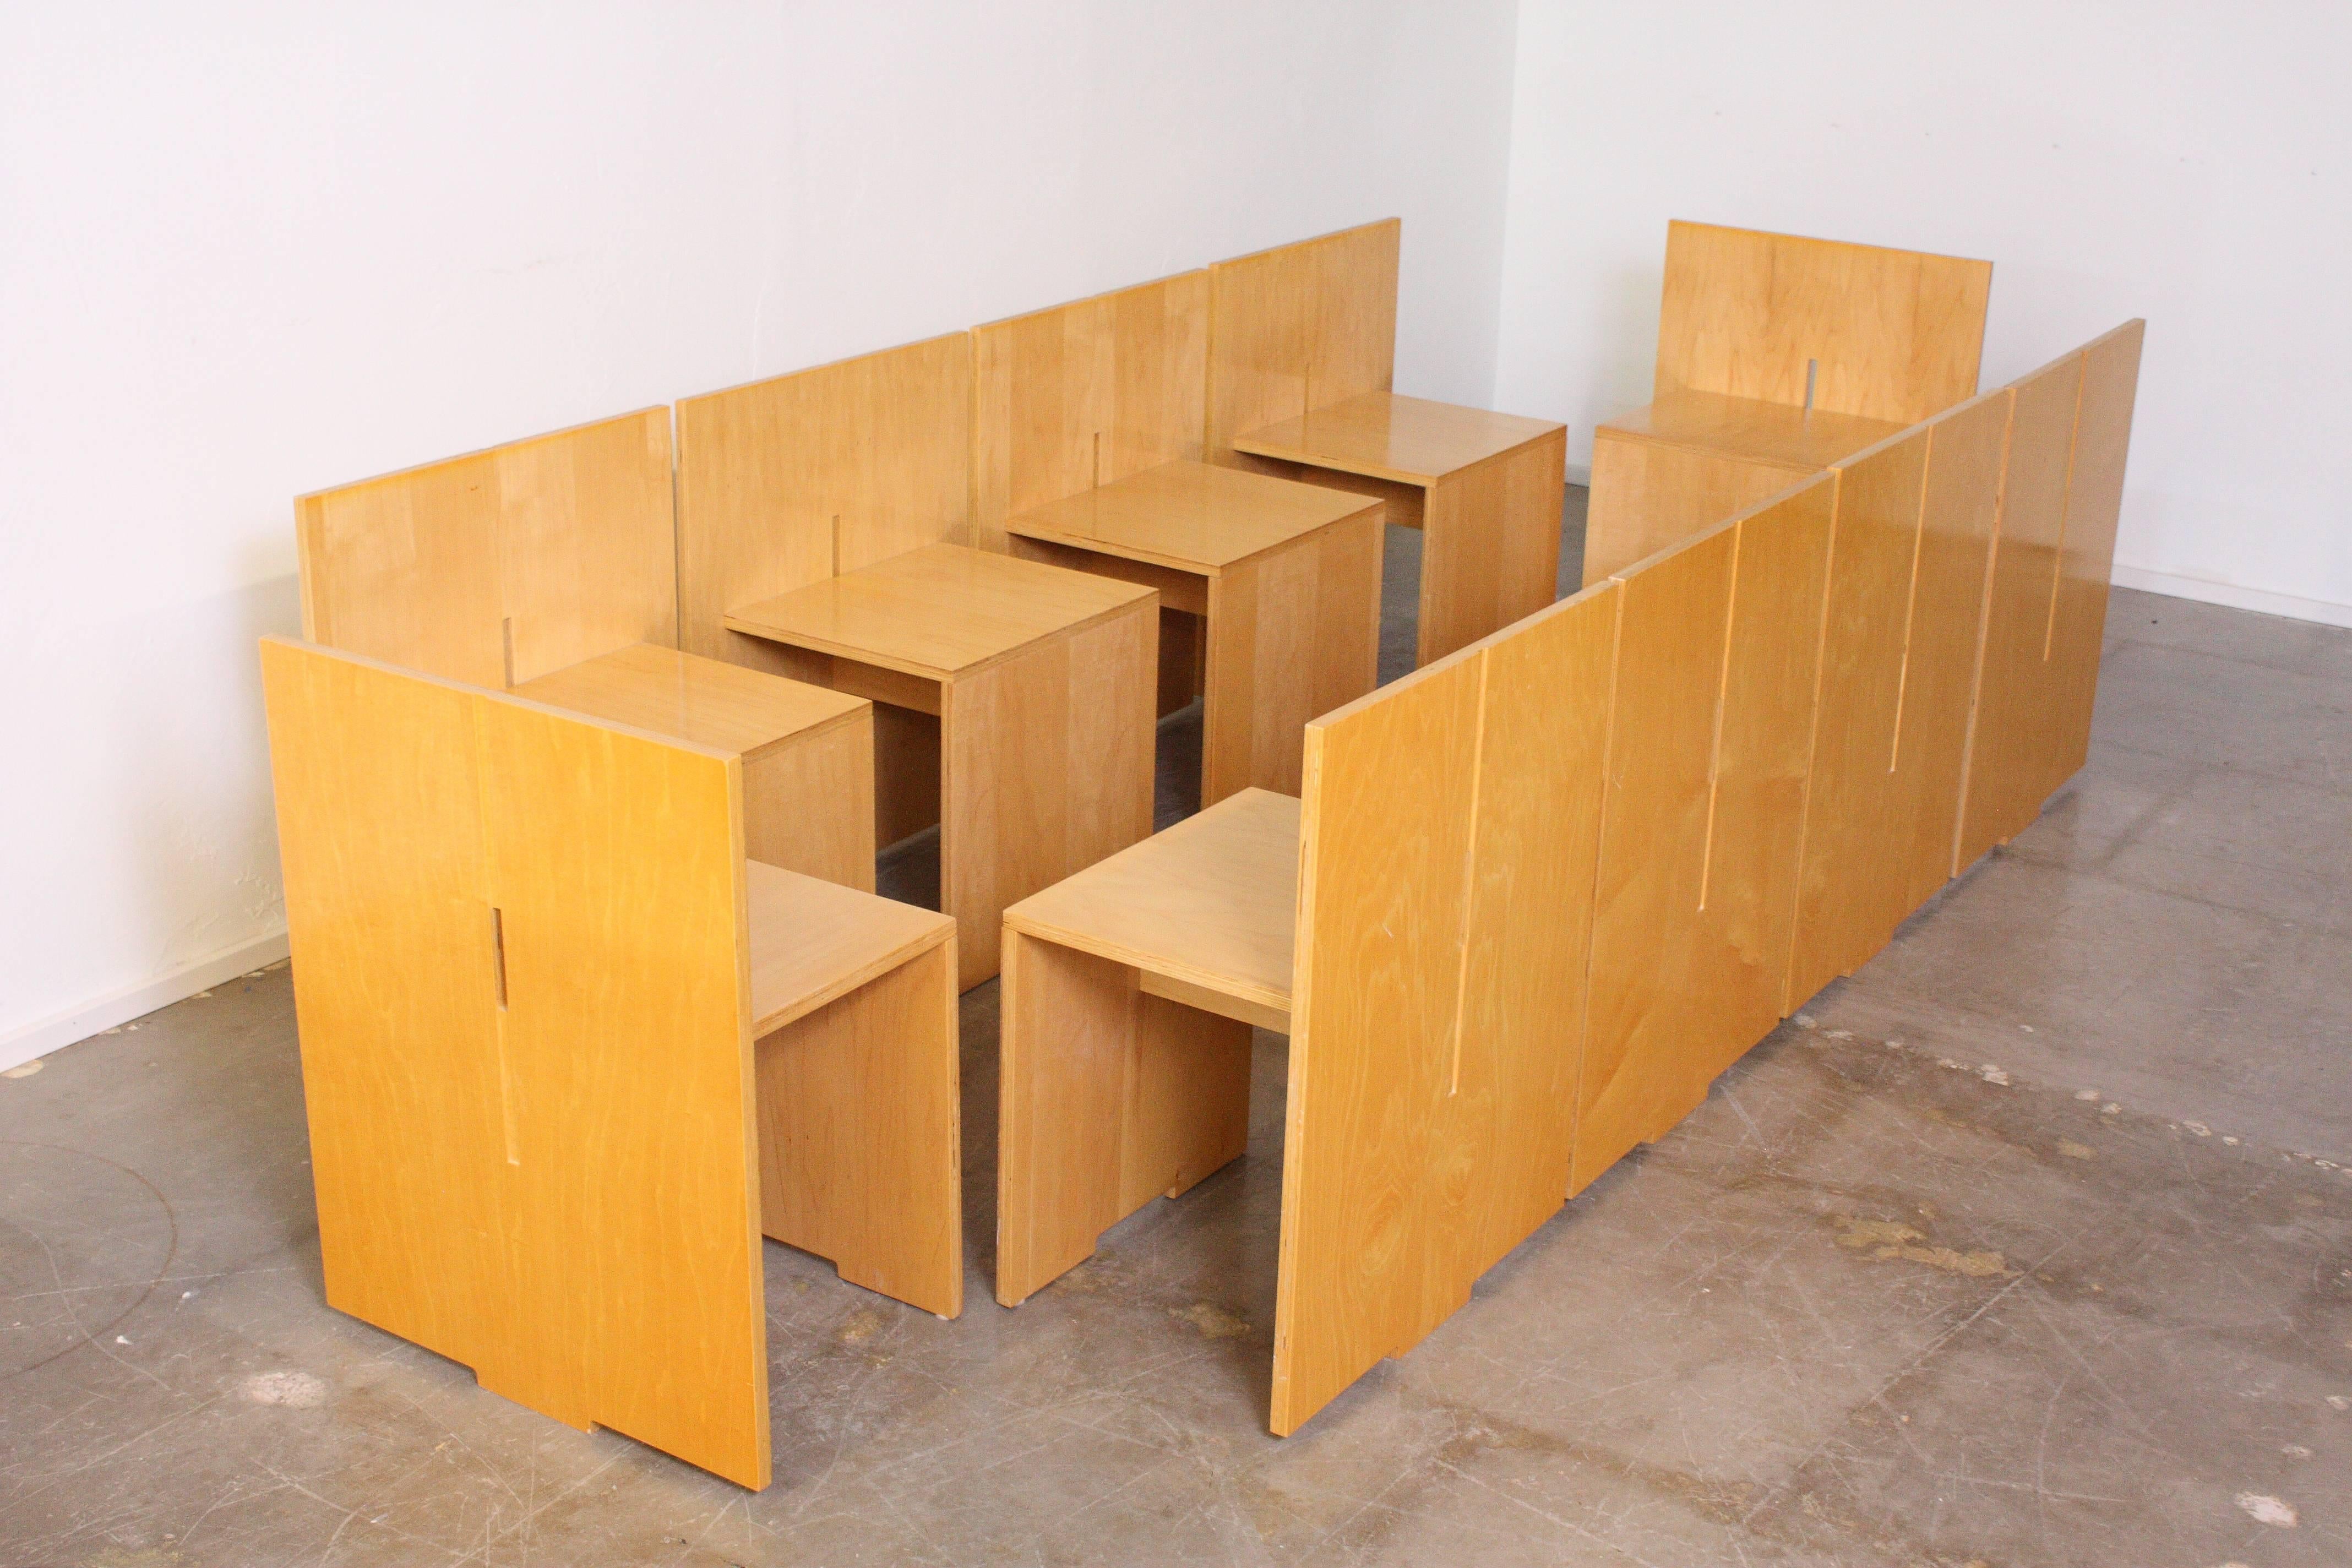 Minimalist Architectural Dining Table and Ten Chairs in the Style of Donald Judd